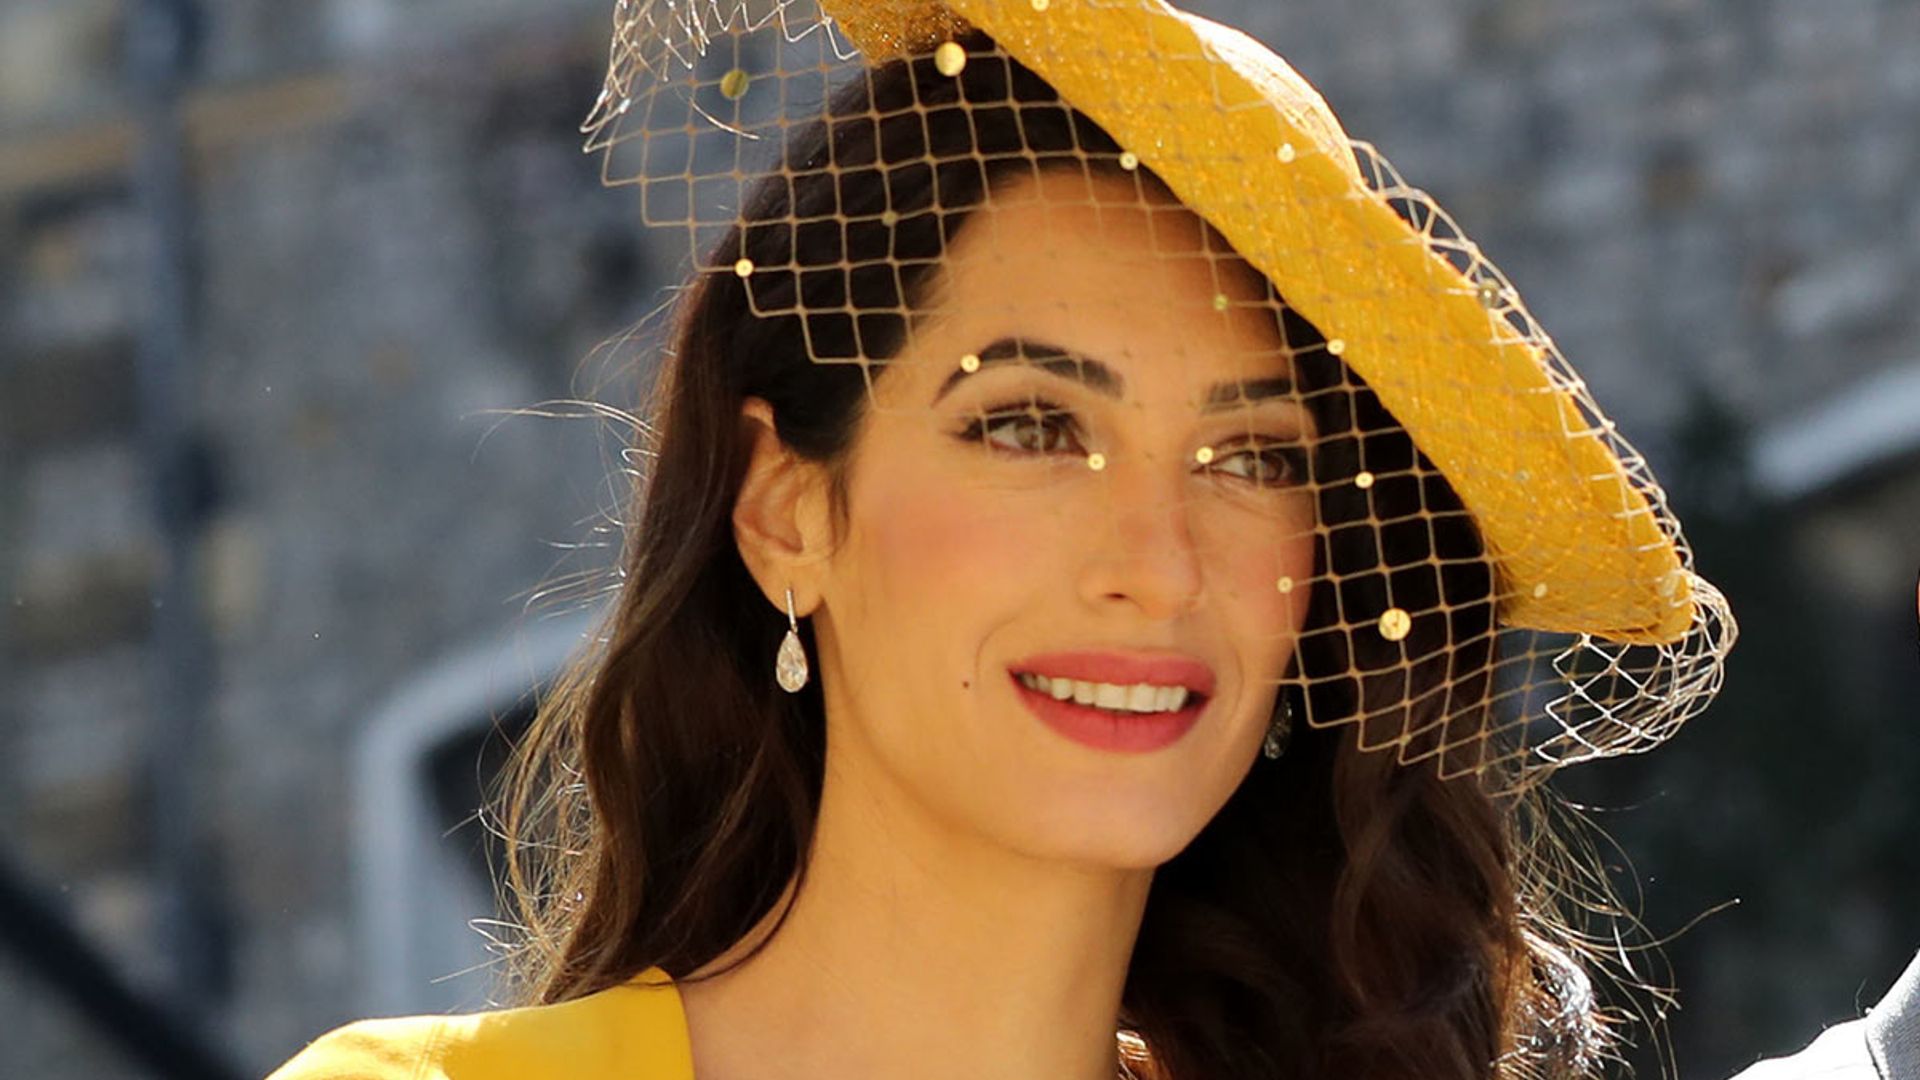 Charlotte Tilbury reveals how to get dewy, glowing skin on your wedding day like Amal Clooney